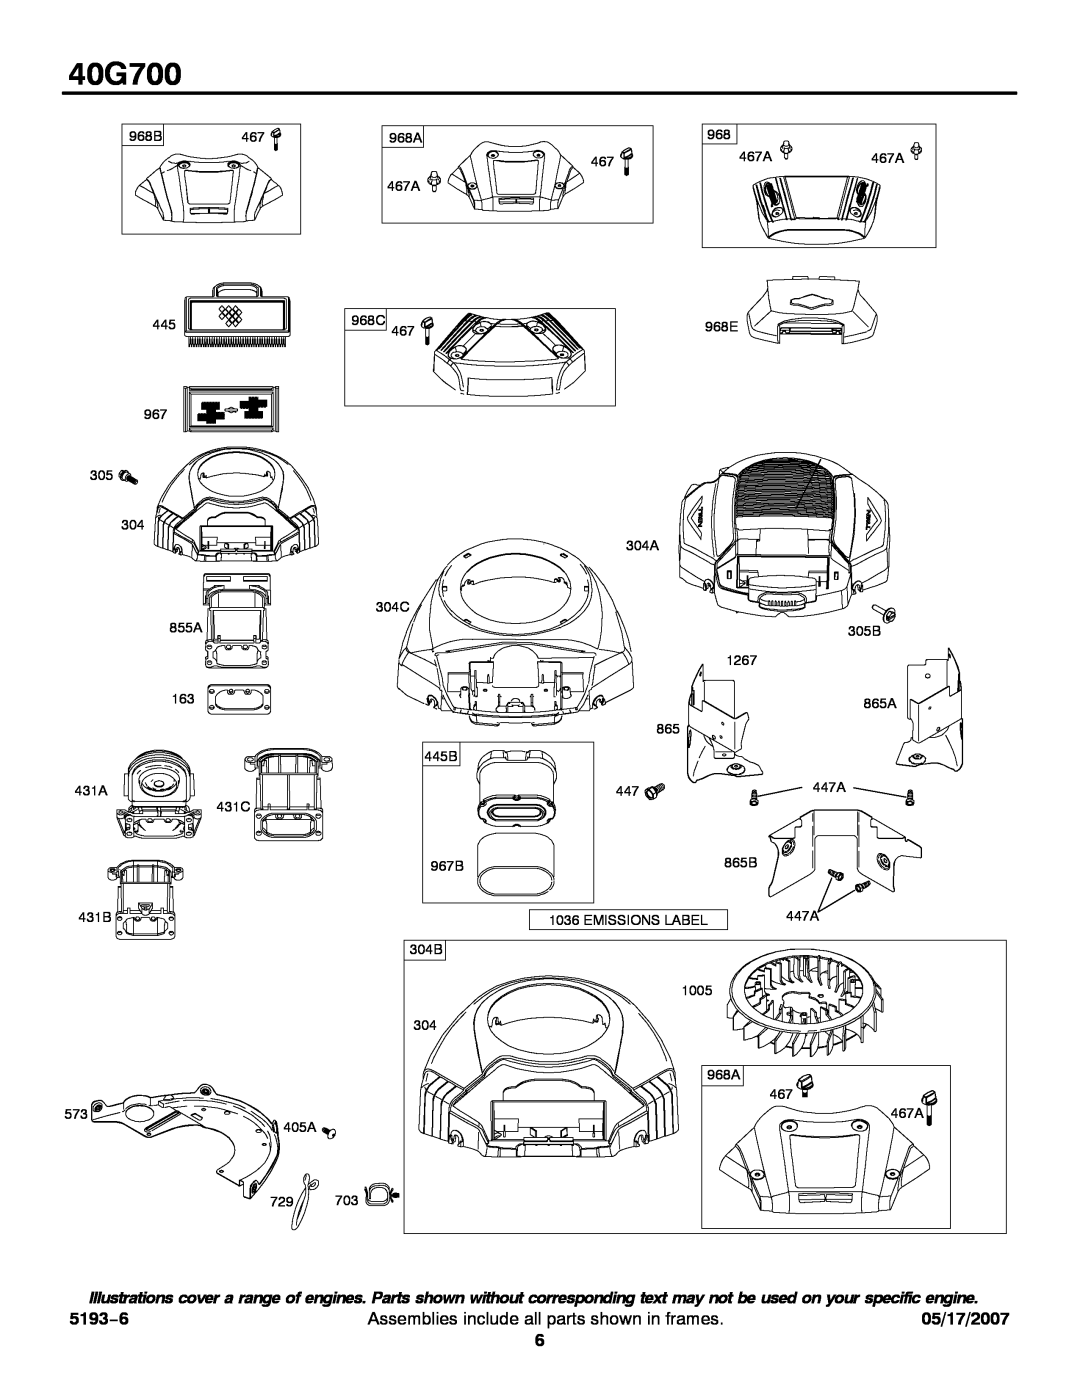 Briggs & Stratton 40G700 service manual 5193−6, Assemblies include all parts shown in frames, 05/17/2007, 968B 